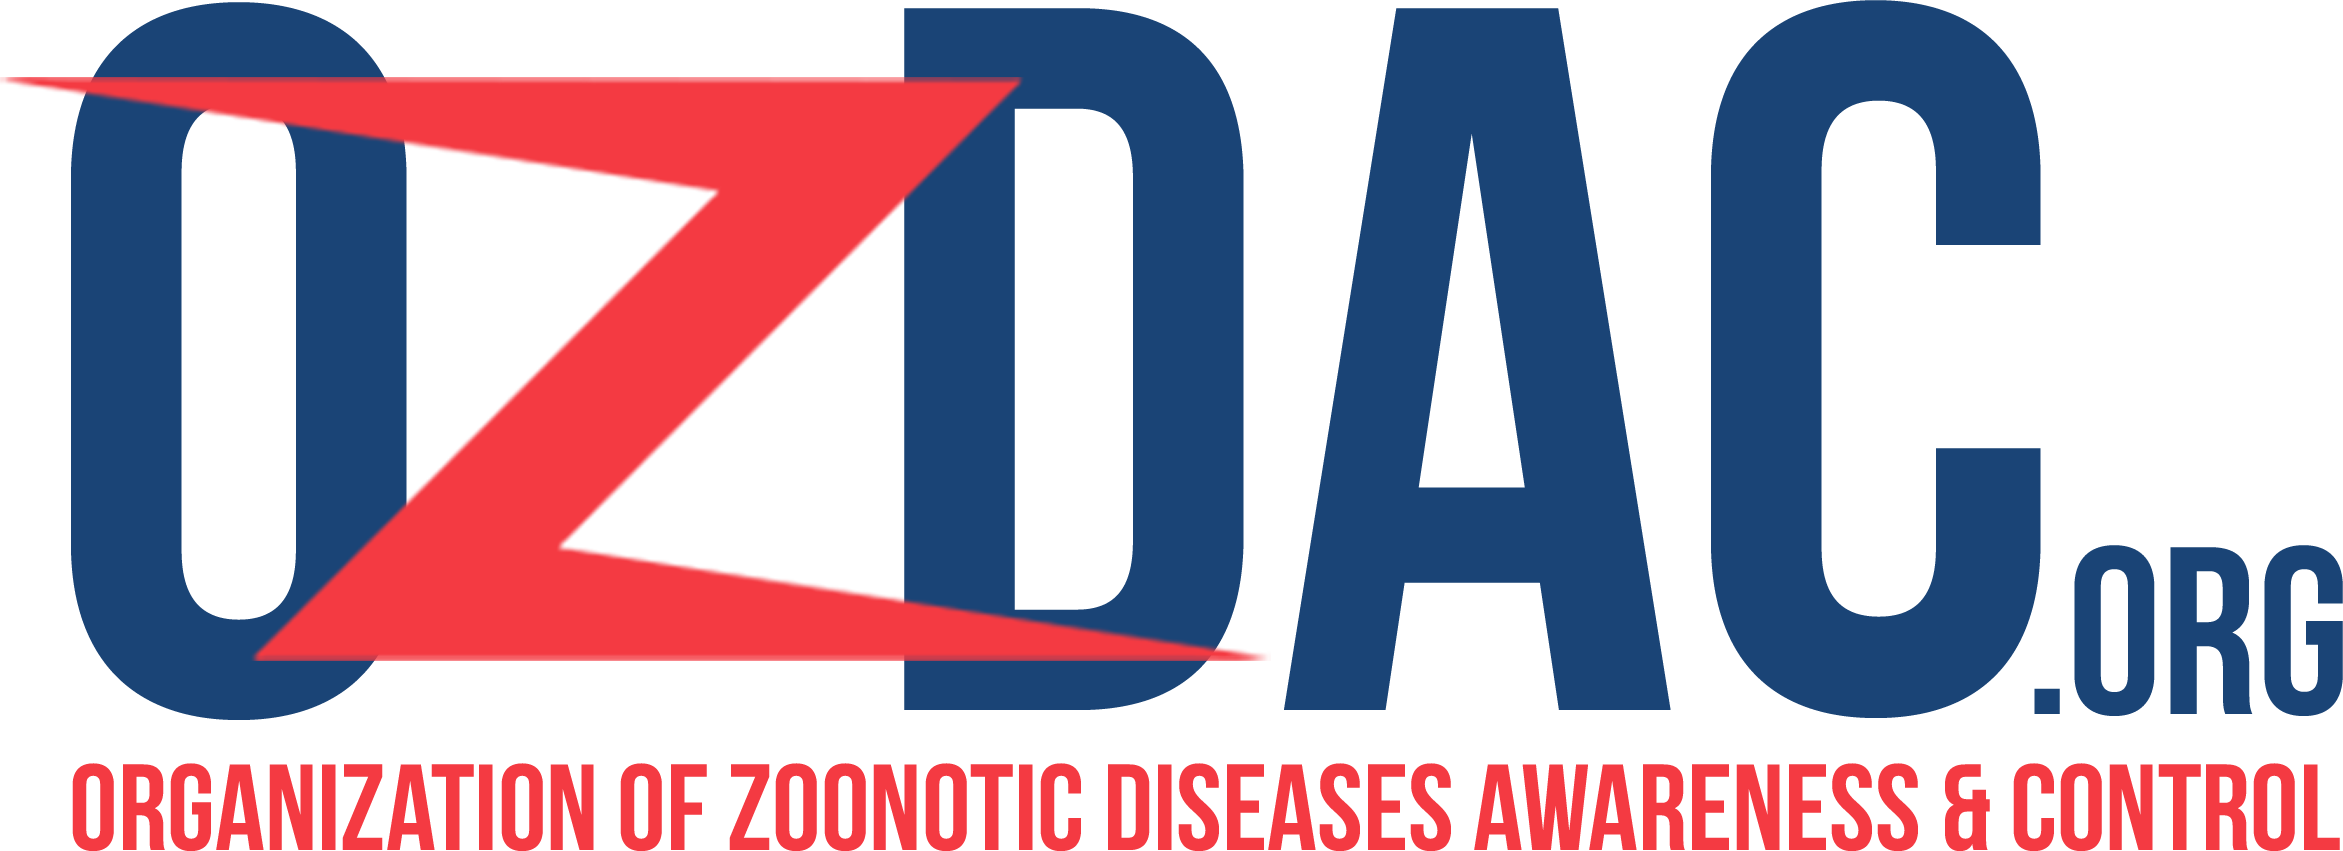 Organization of Zoonotic Diseases Awareness and Control